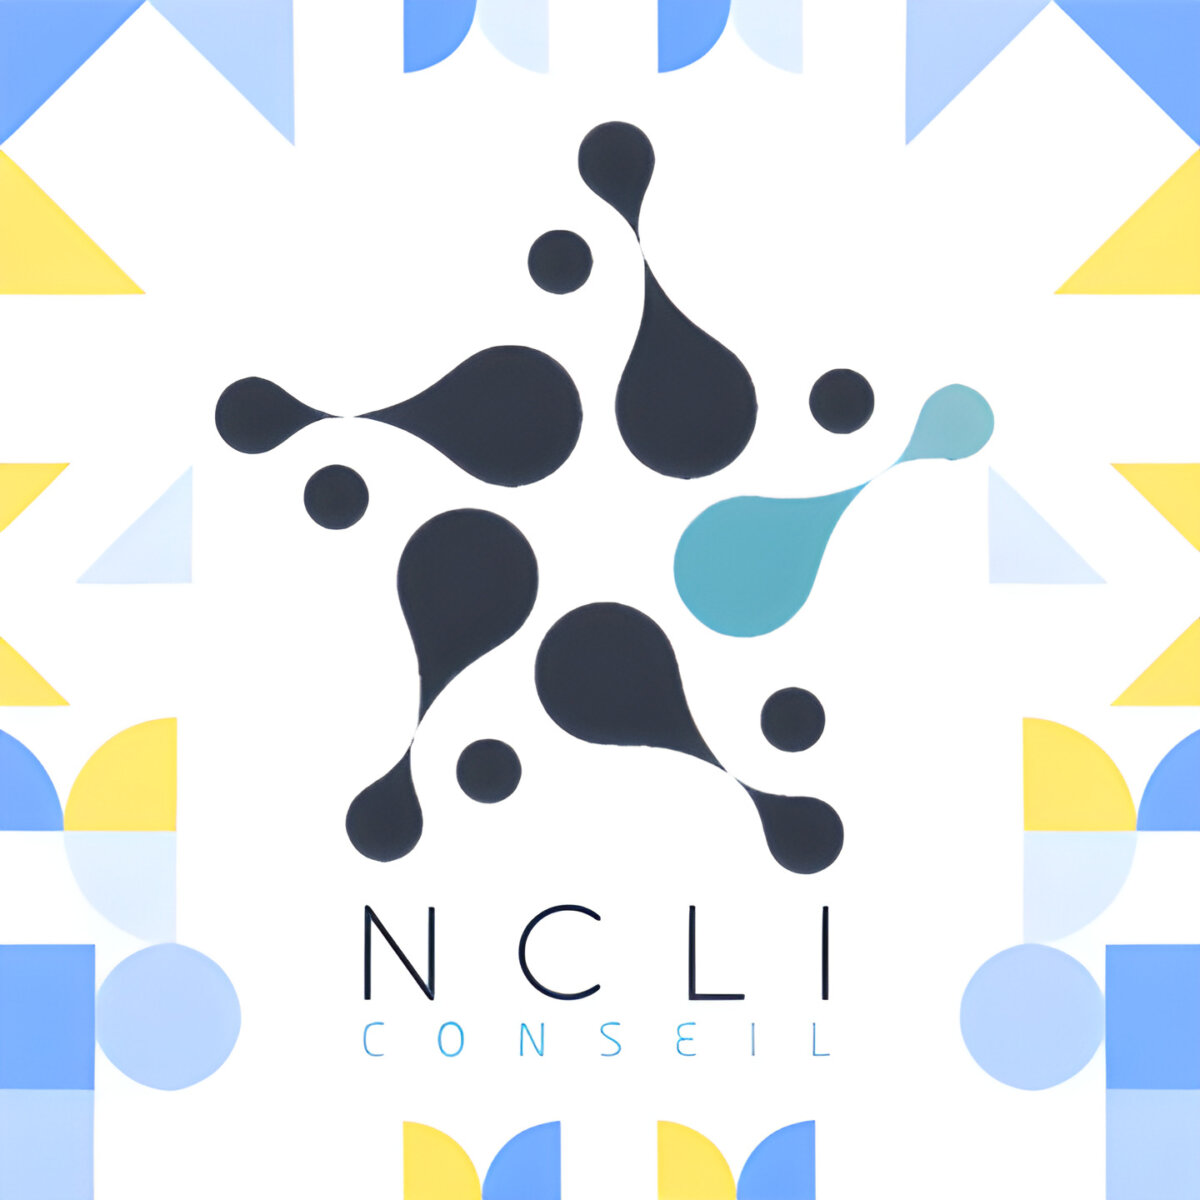 Our new partner, NCLI Conseils